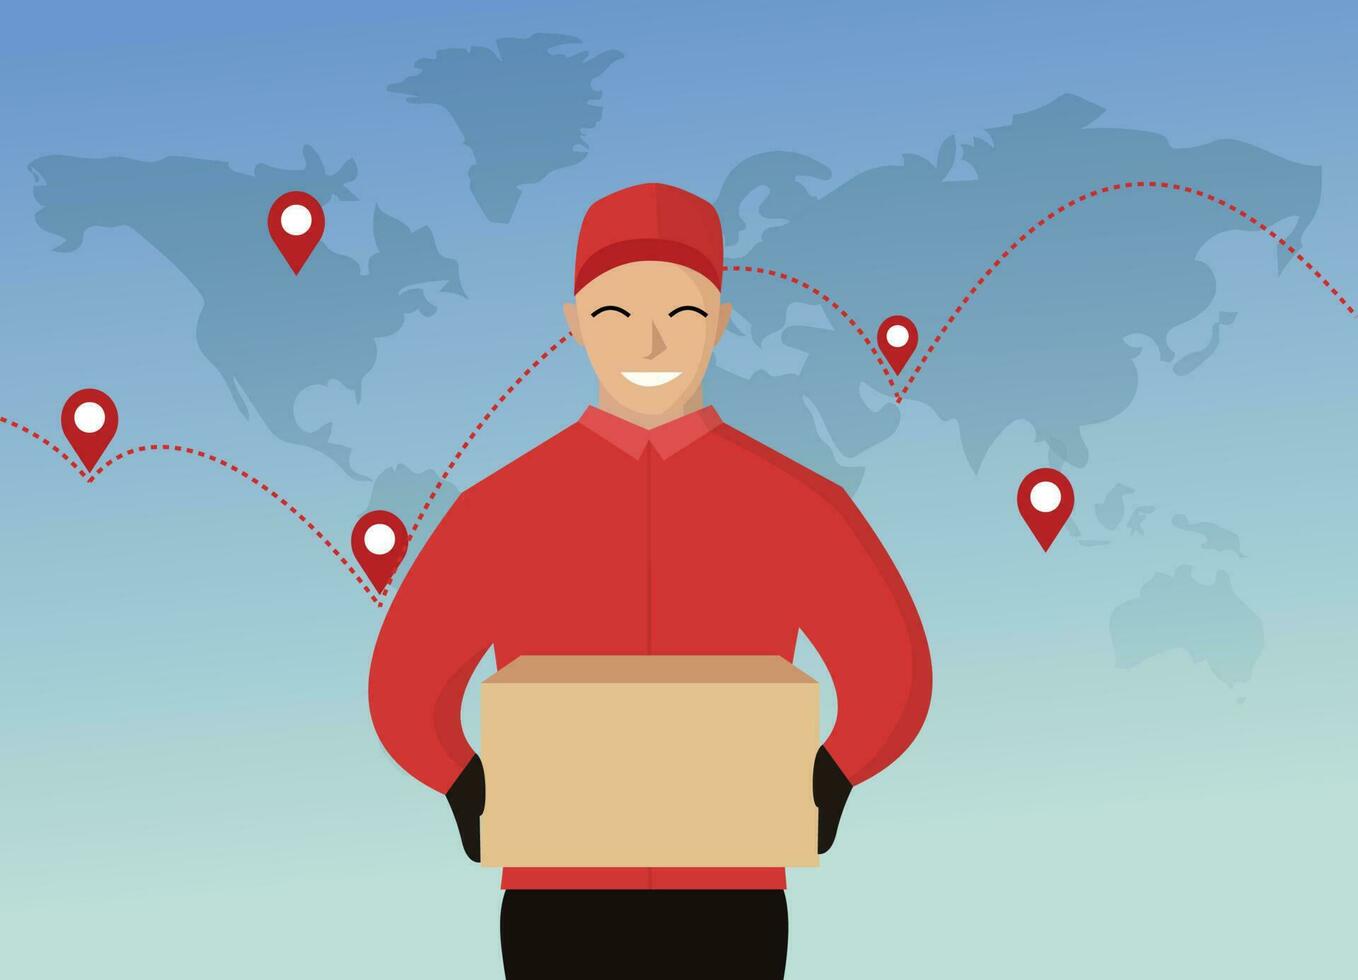 Courier Carrying Packages sent around the world vector illustration, global logistics, delivery man